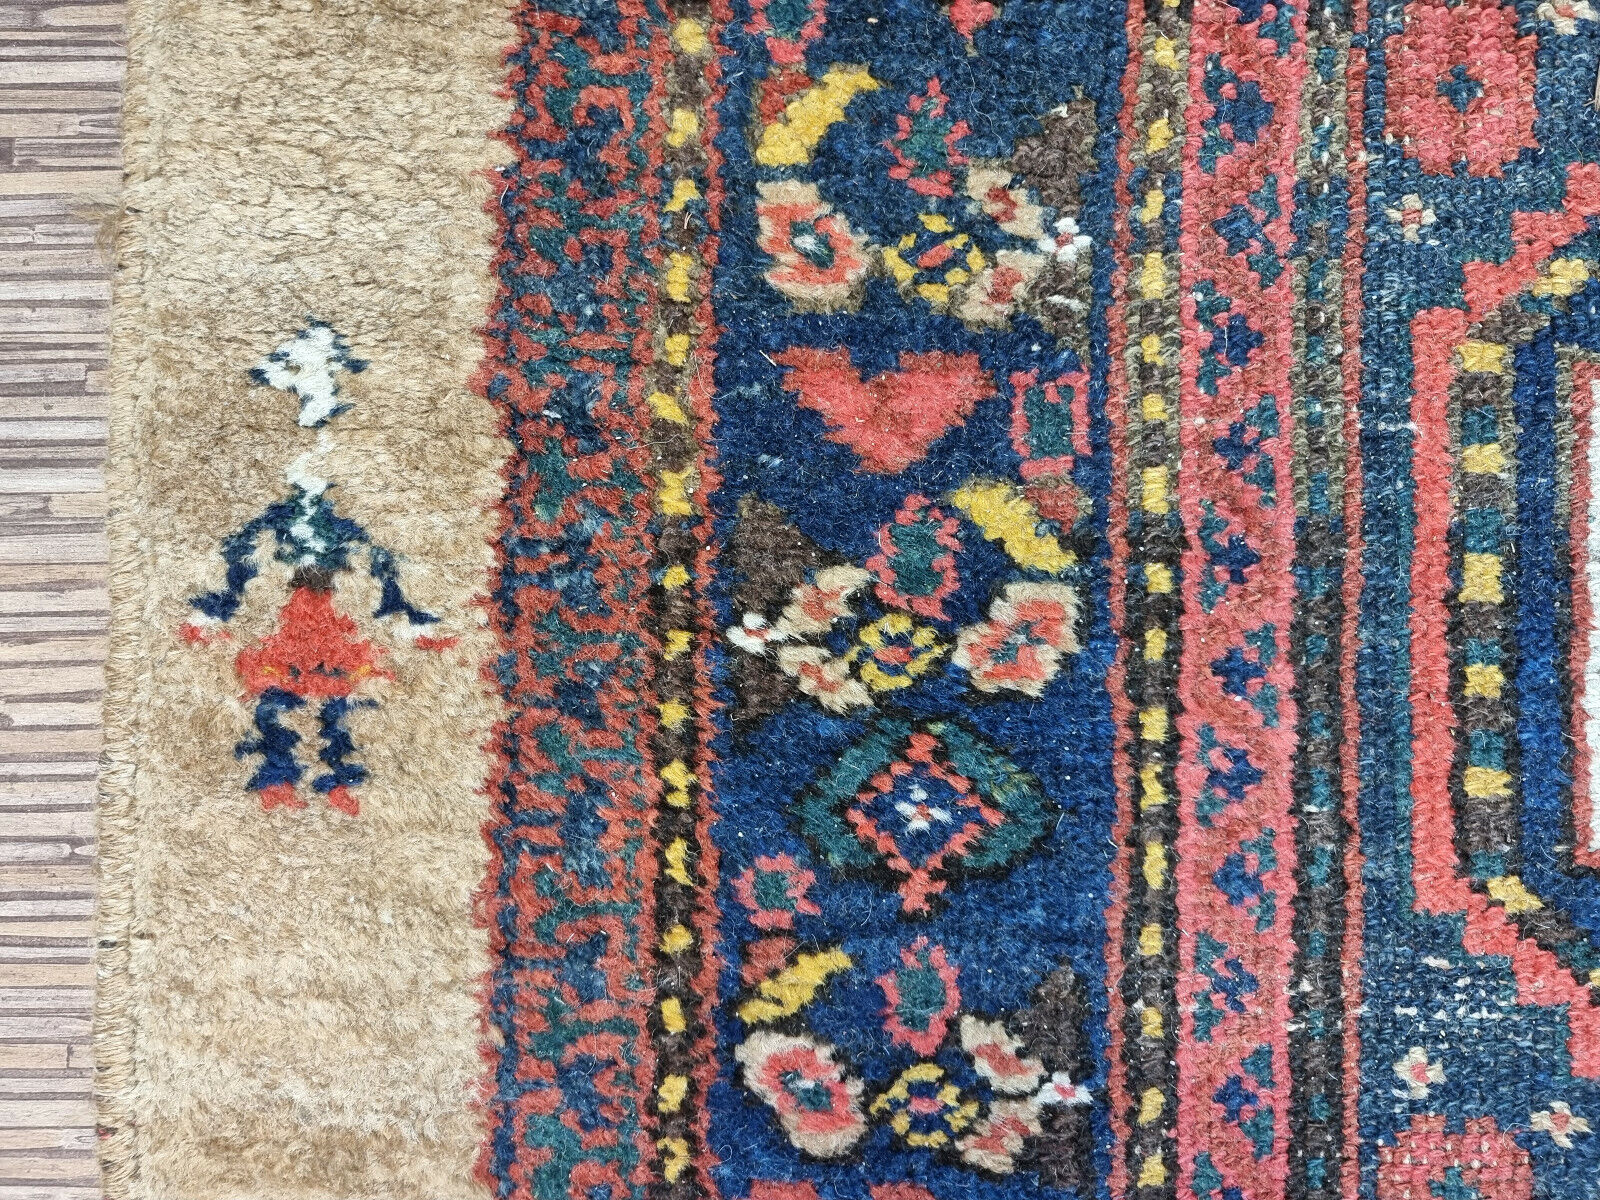 Close-up of vibrant green accents on Handmade Antique Persian Camel Hair Runner Rug - Detailed view highlighting the vibrant green accents interspersed within the floral motifs on the border.